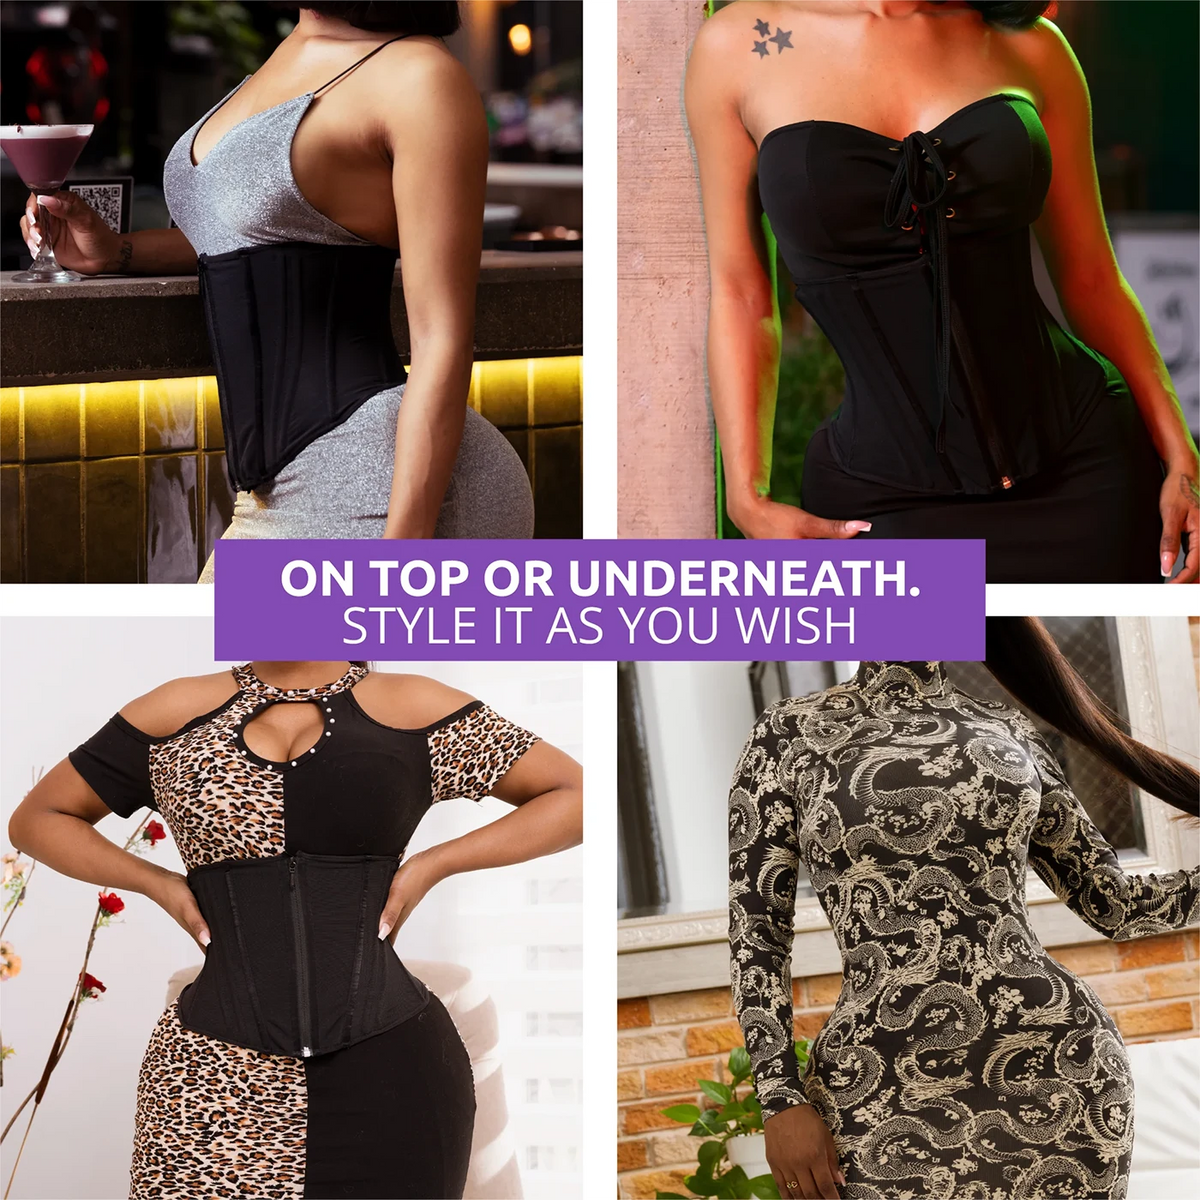 Forms an amazing Waist: The Demi Waist Cincher by Vedette